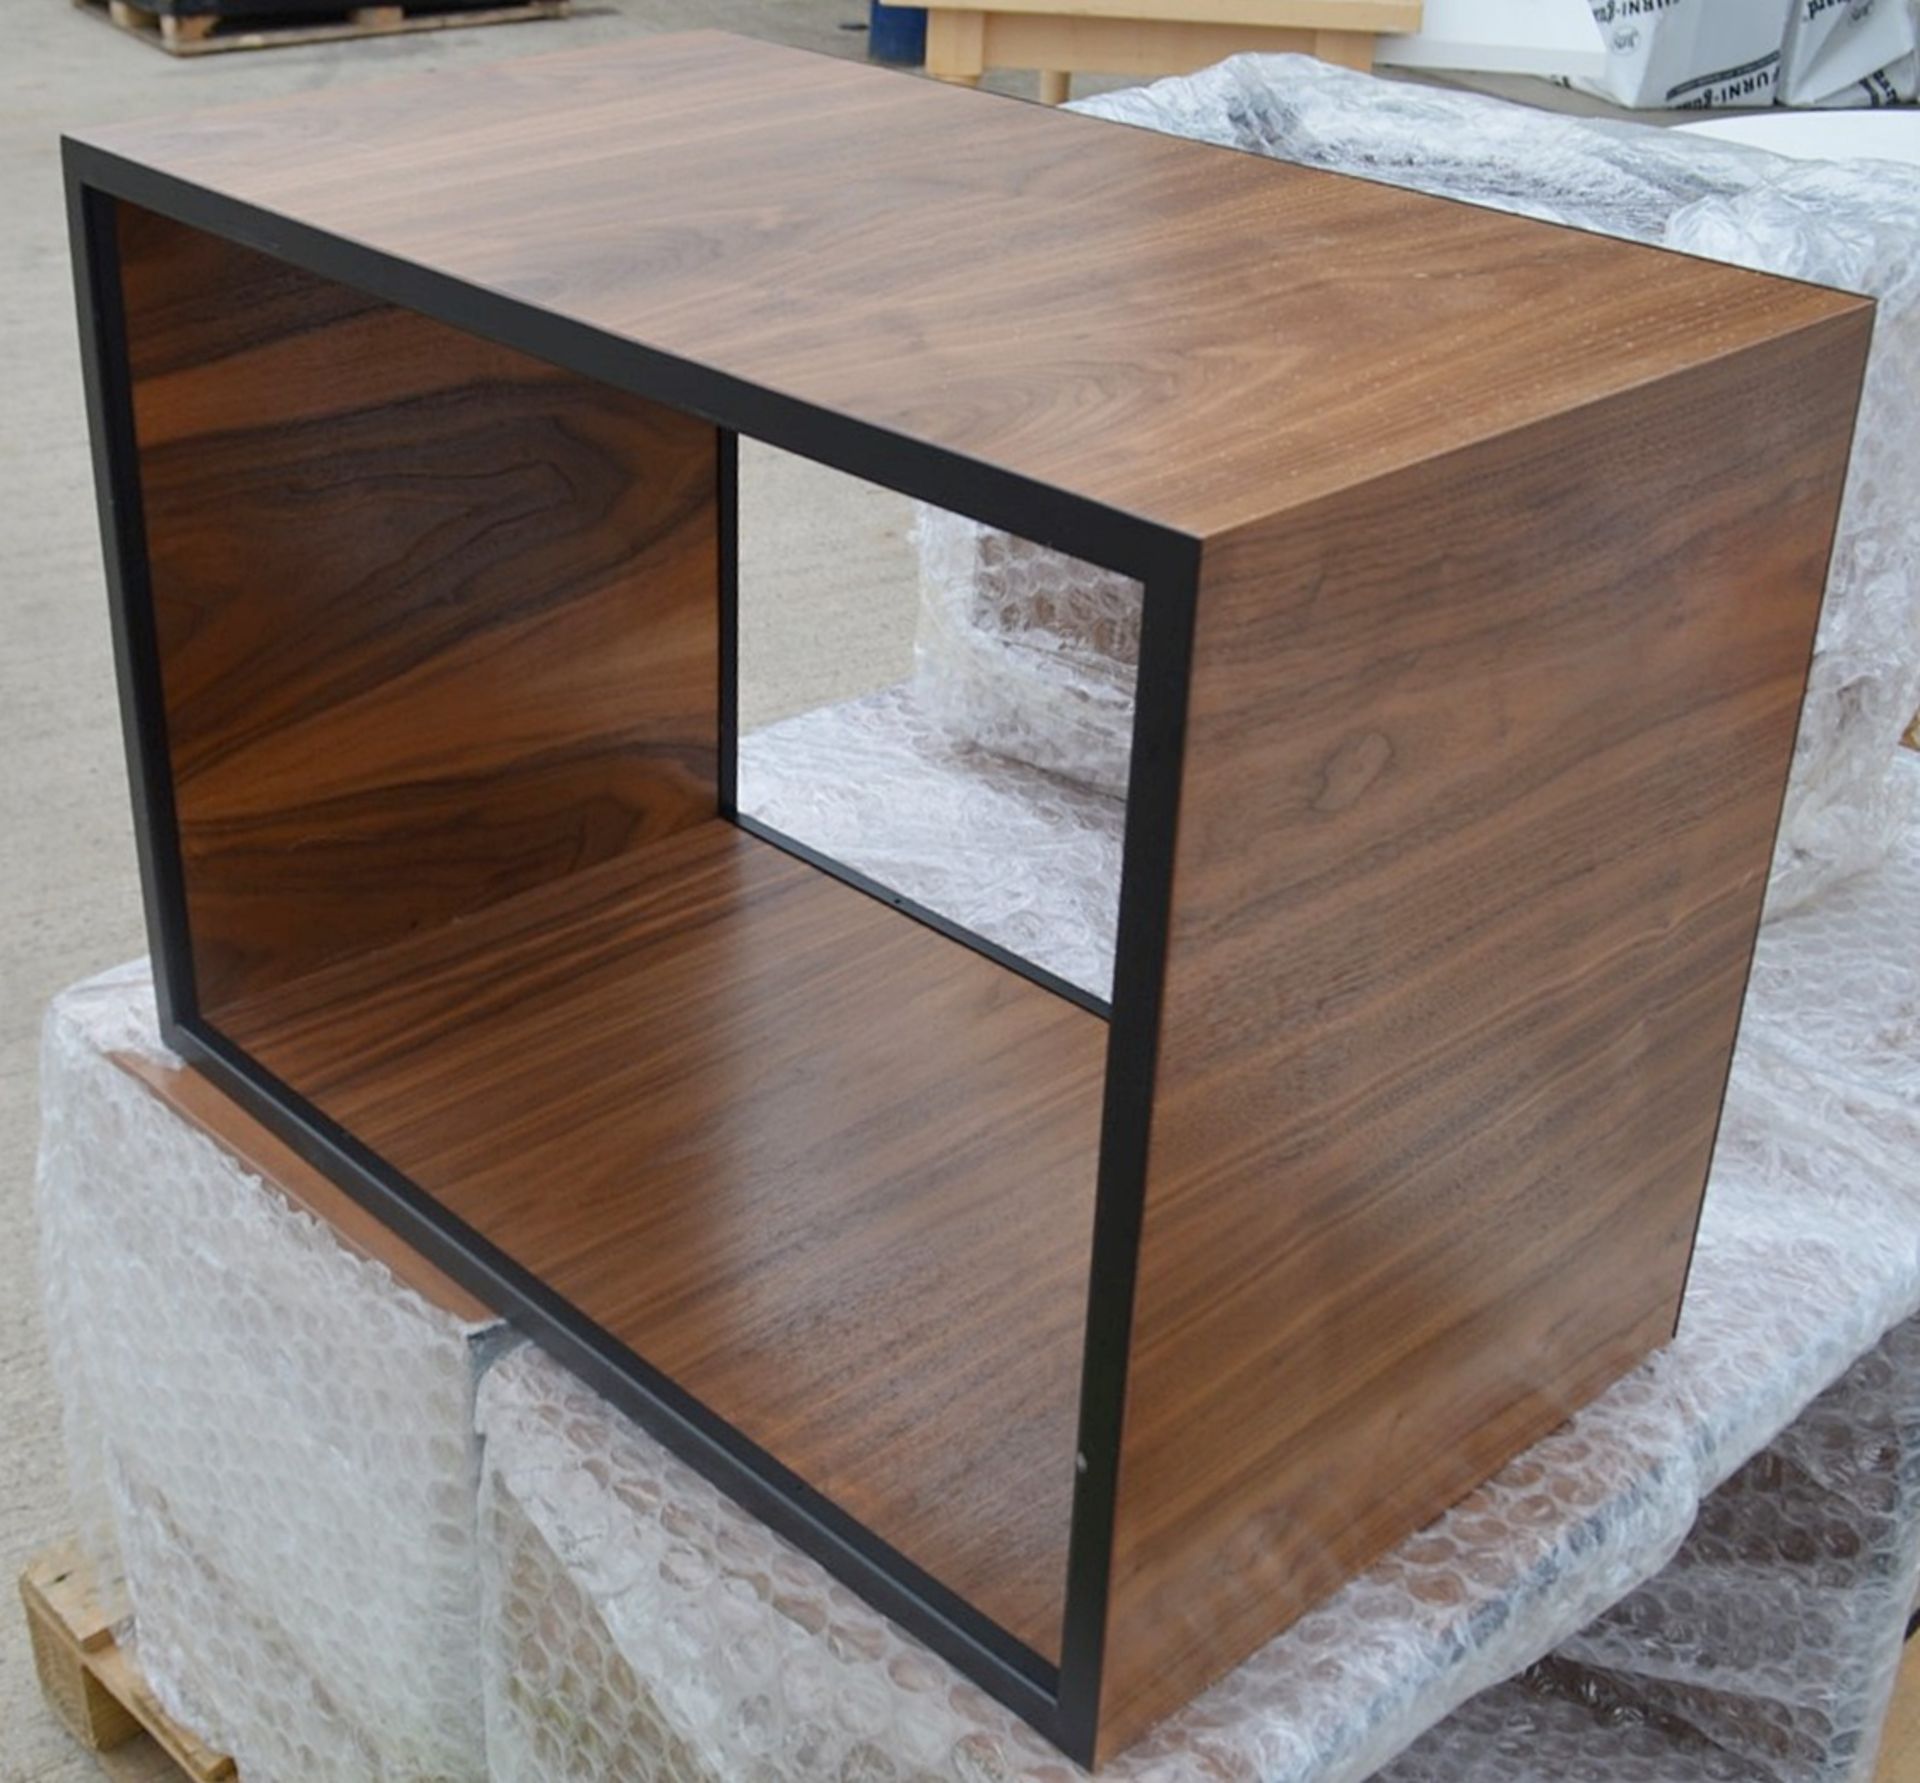 1 x Cube Shaped Table With A Wood Finish And Black Metal Frame - Dimensions: H50xW70xD40cm - Image 2 of 5